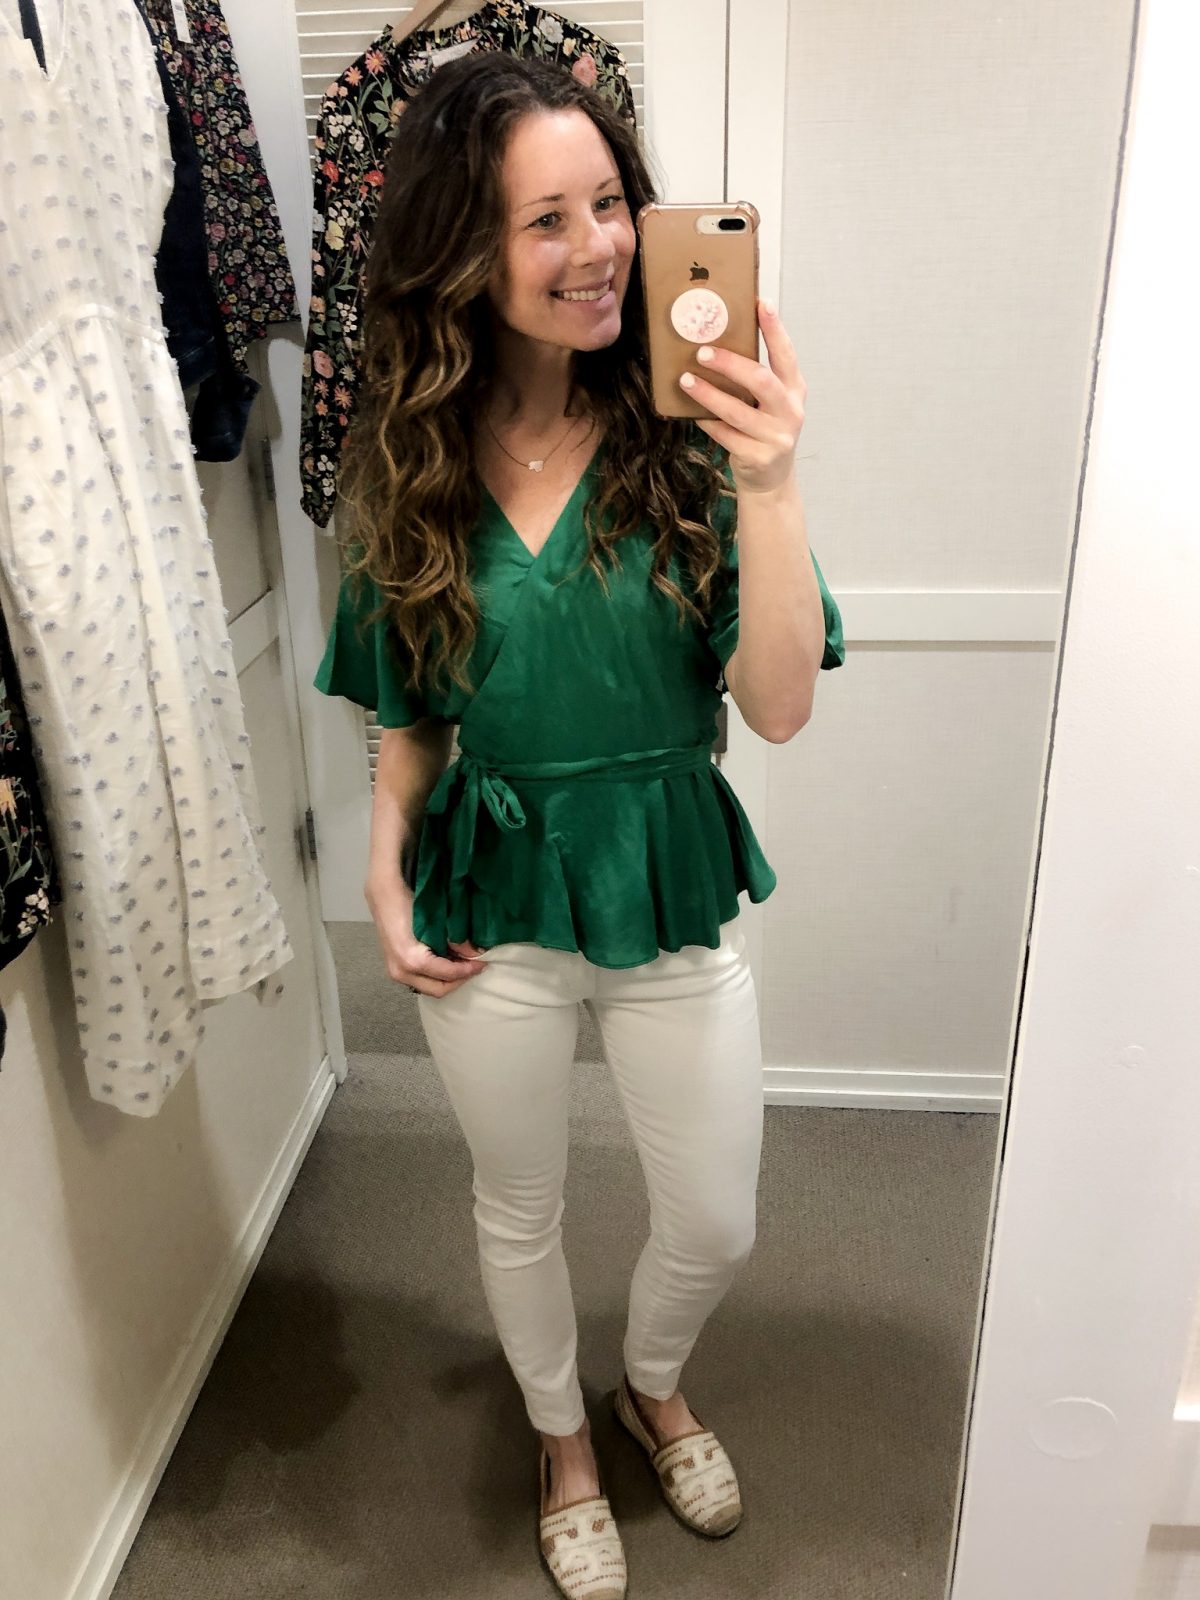 Green Wrap Top with White Cropped Denim and Tan Tory Burch Espadrilles White Floral Flowy Long Sleeve Top and Gray Cropped Pants with Eyelet Hem on Woman at LOFT Confessions of a Northern Belle